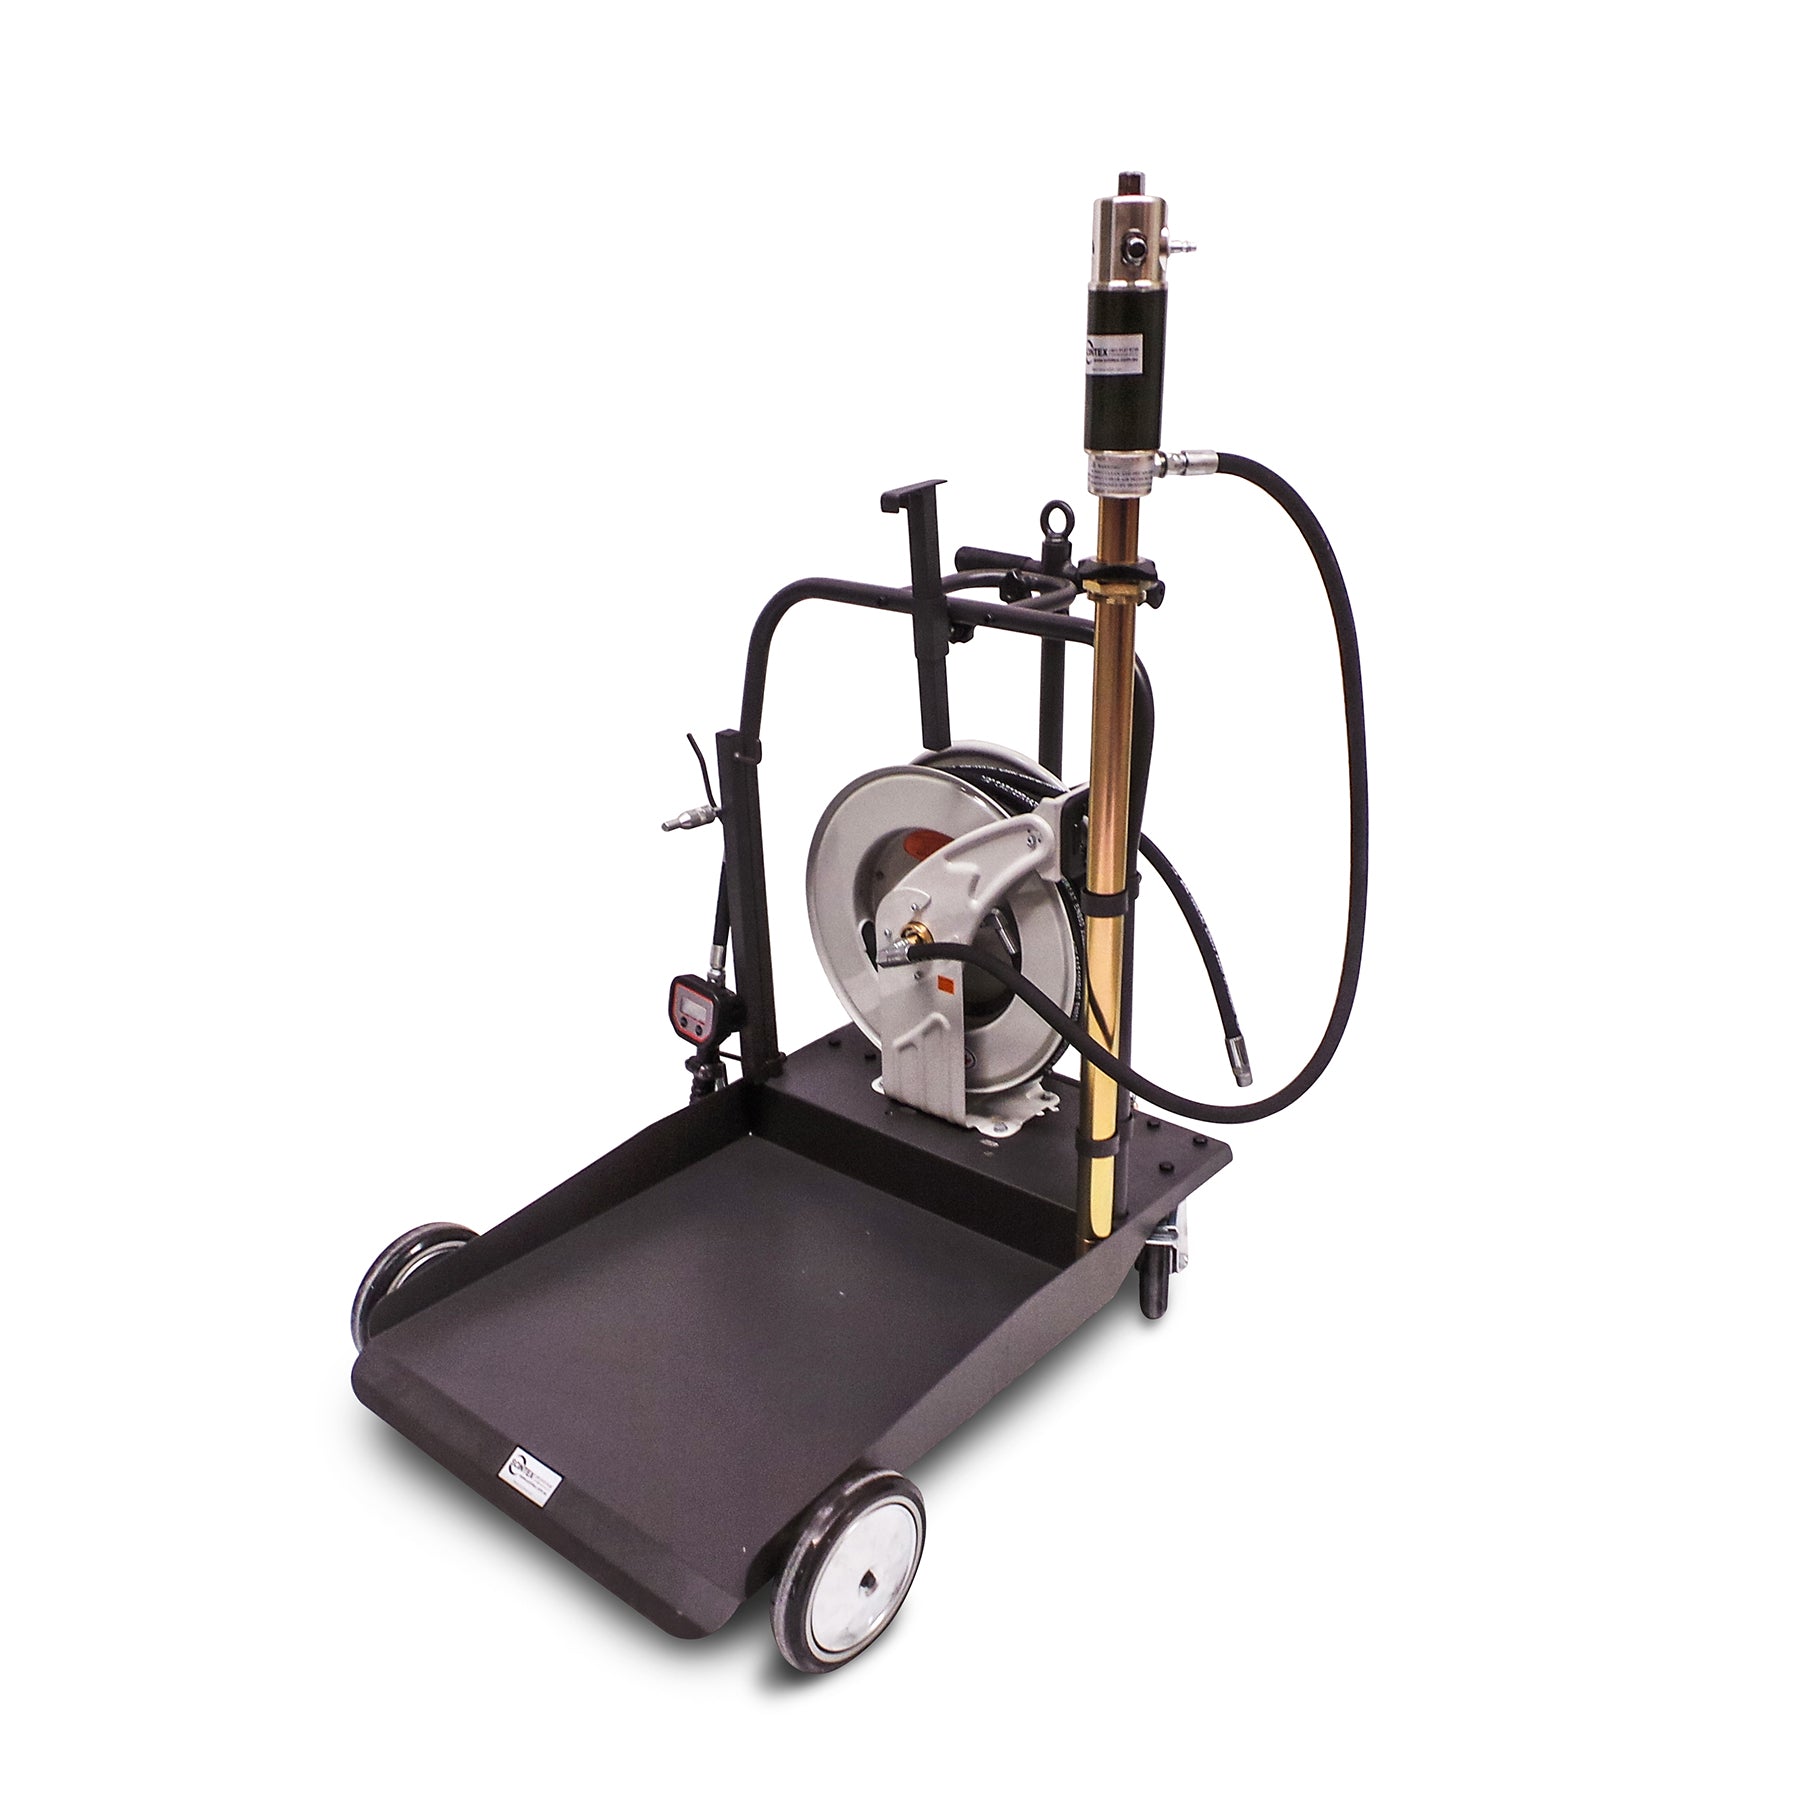 oil service drum pumping kit with trolley